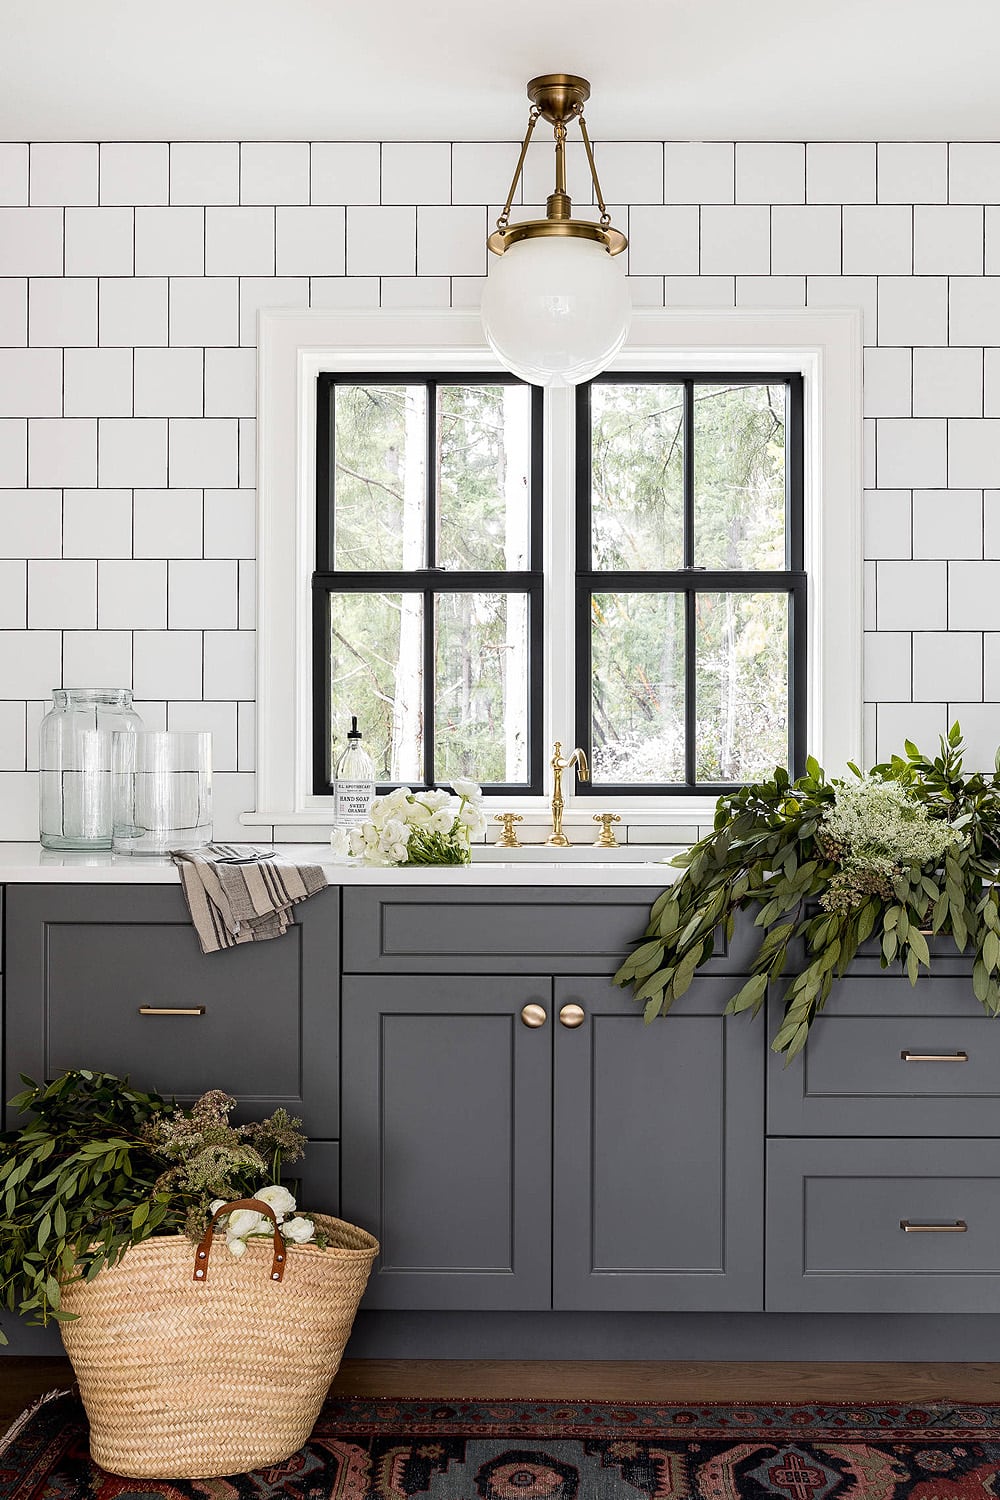 dark grey kitchen cabinets with gold cabinet hardware, white square tile with dark grout.